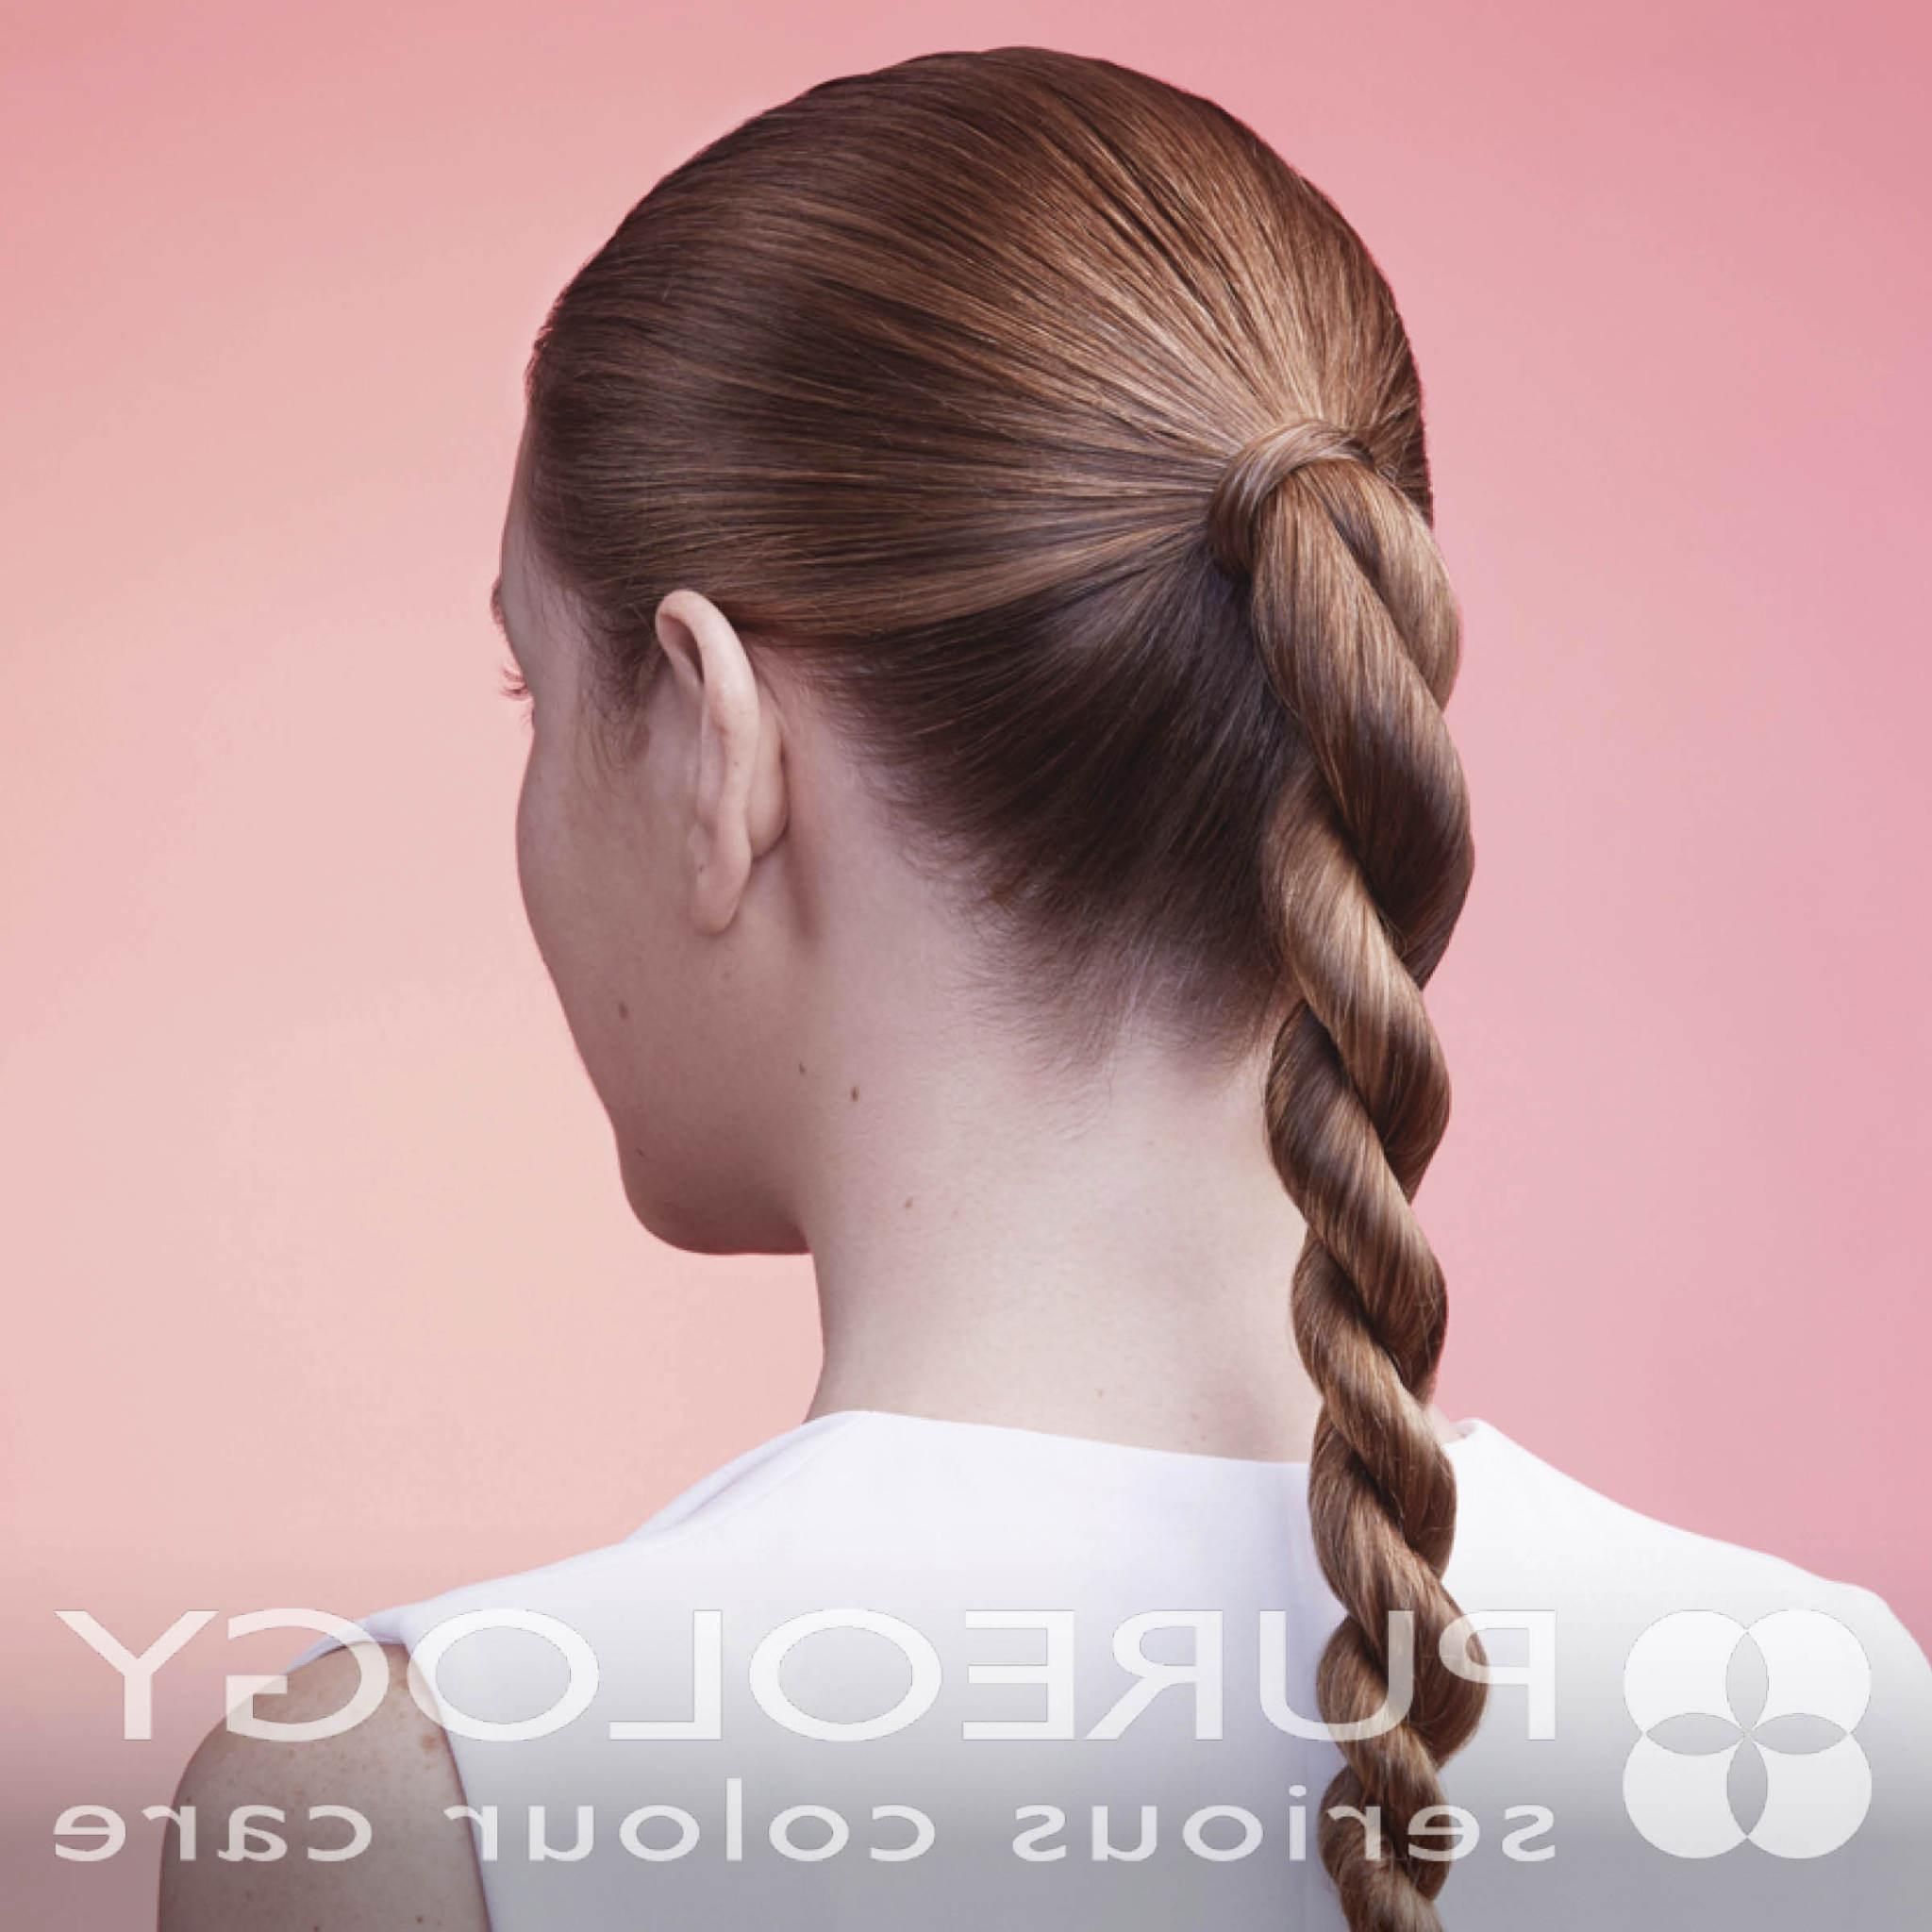 7 Gym Hairstyles That Are Actually Cute & Easy To Do – Pureology With Regard To Most Popular High Rope Braid Hairstyles (View 12 of 20)